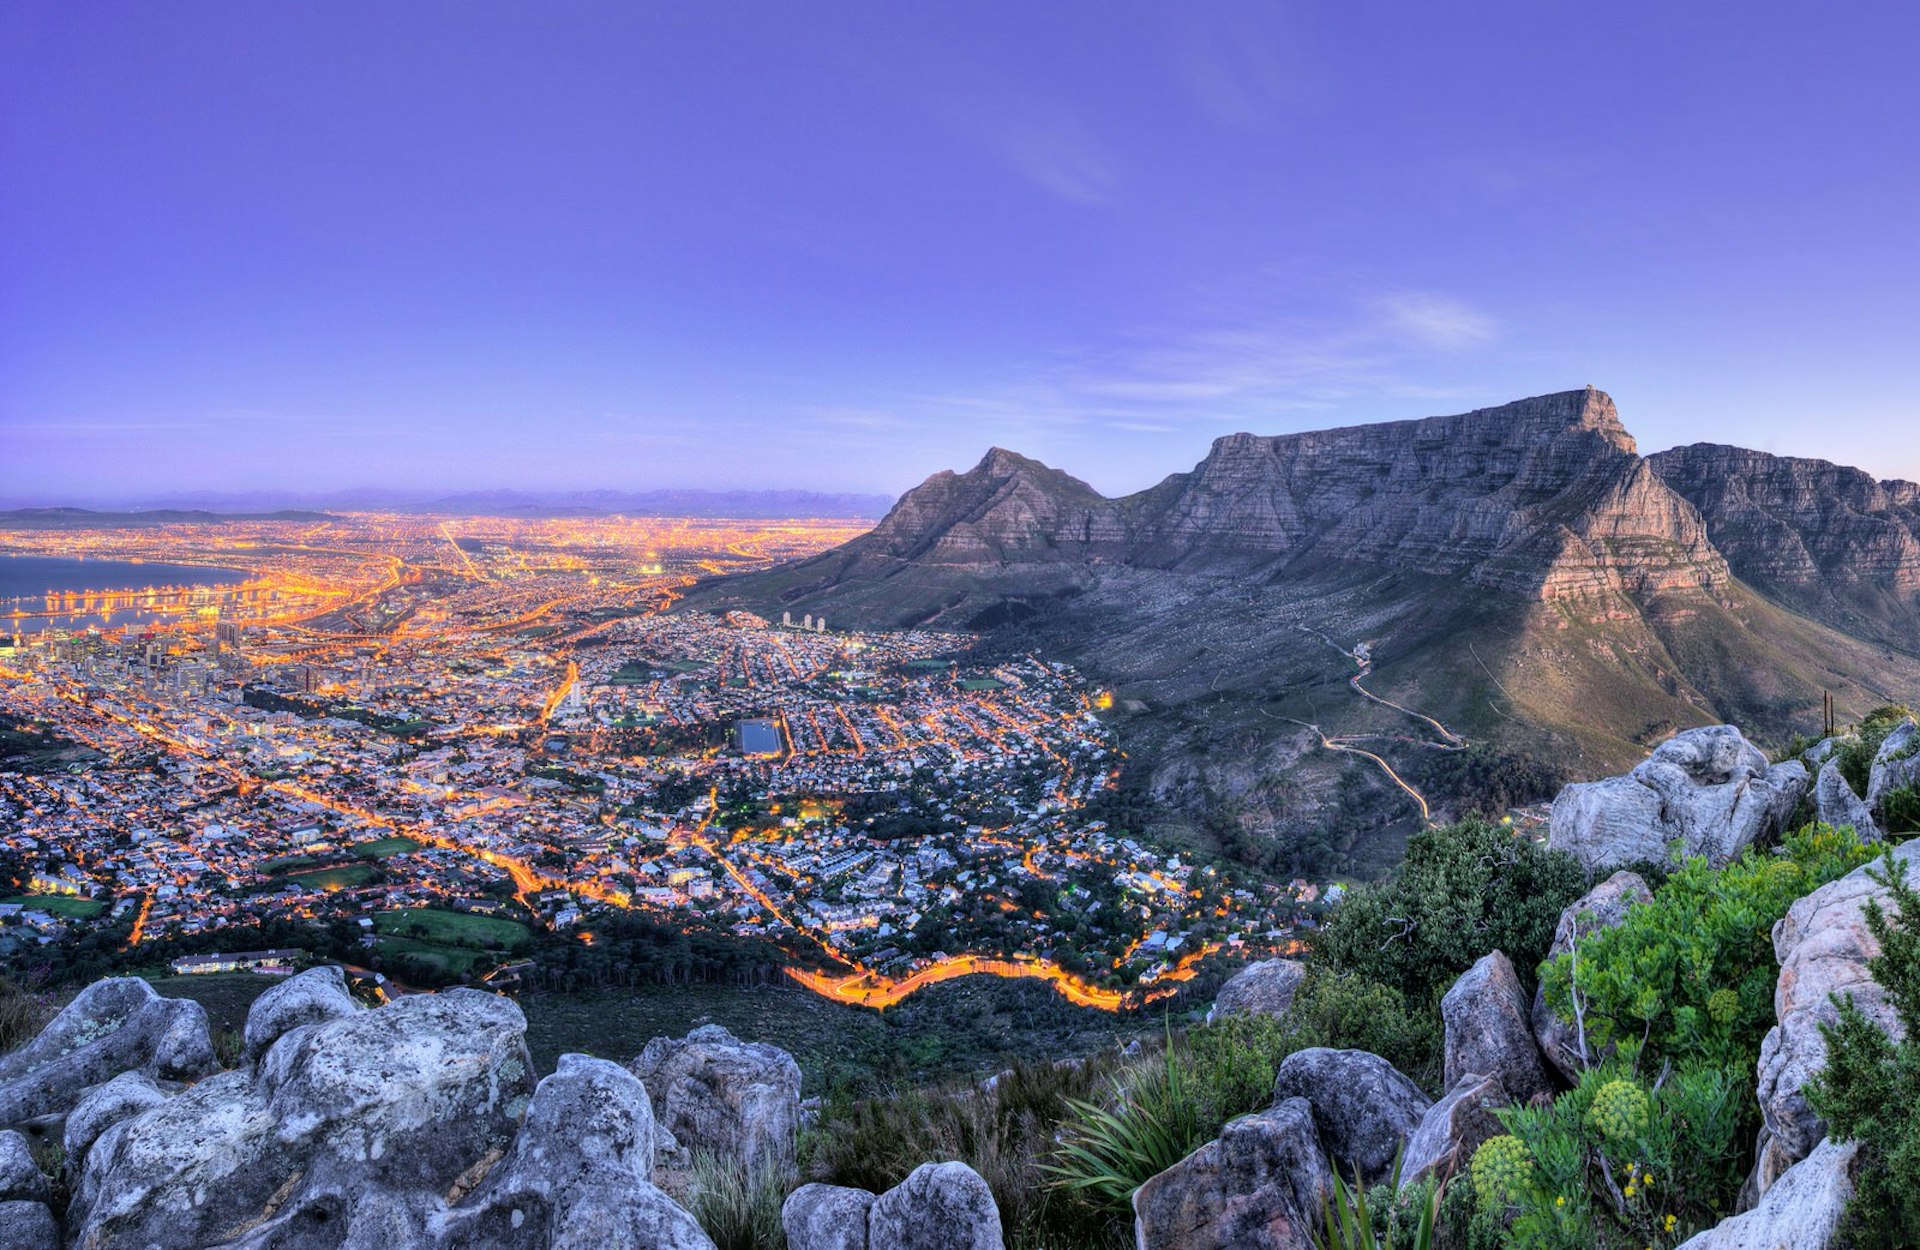 A panoramic view of Cape Town, showing mountains, city and the sea